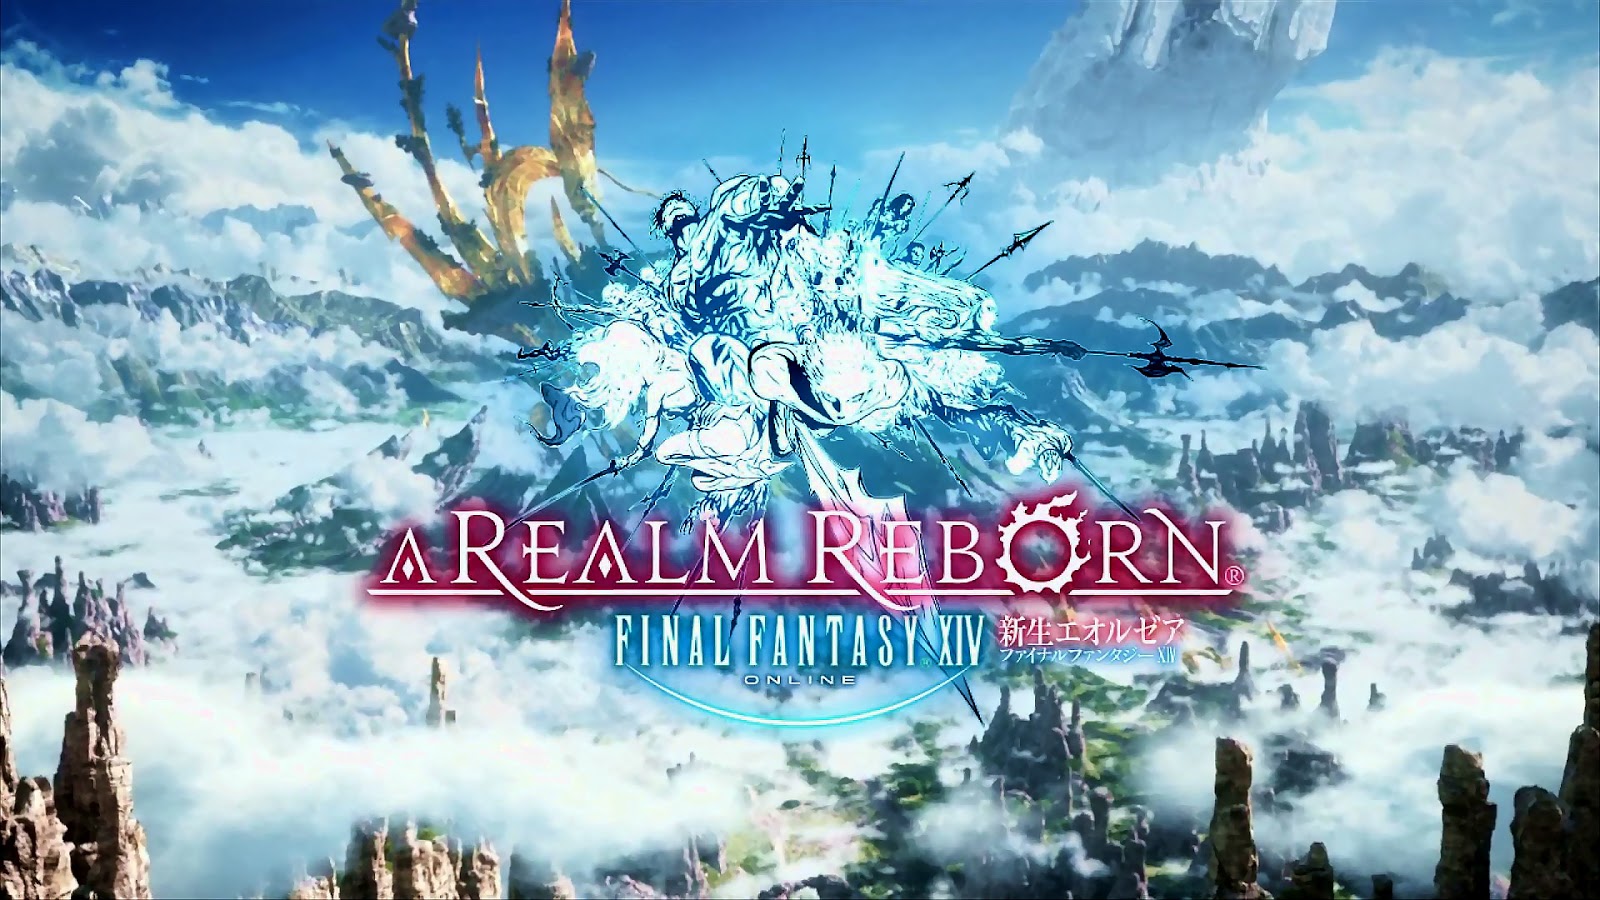 Most Viewed Final Fantasy Xiv A Realm Reborn Wallpapers 4k Wallpapers